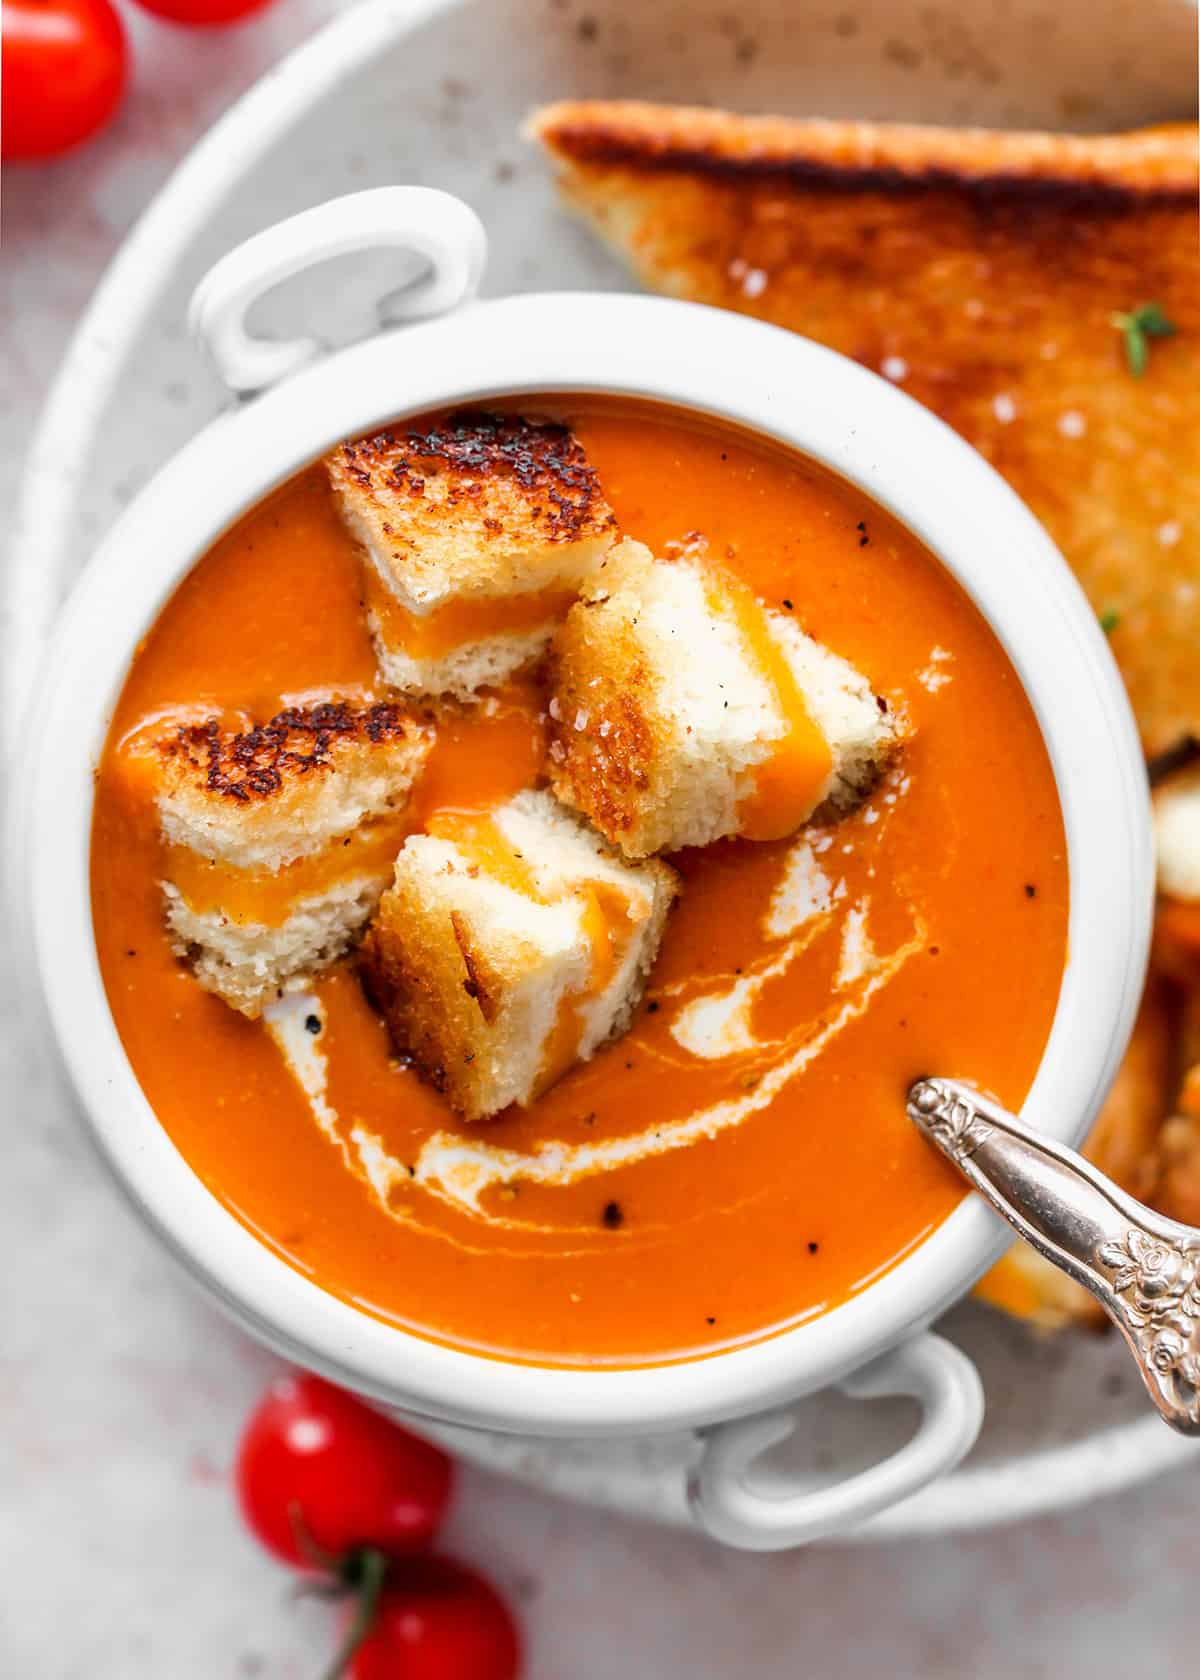 a bowl of Homemade Tomato Soup with grilled cheese cut up in the soup